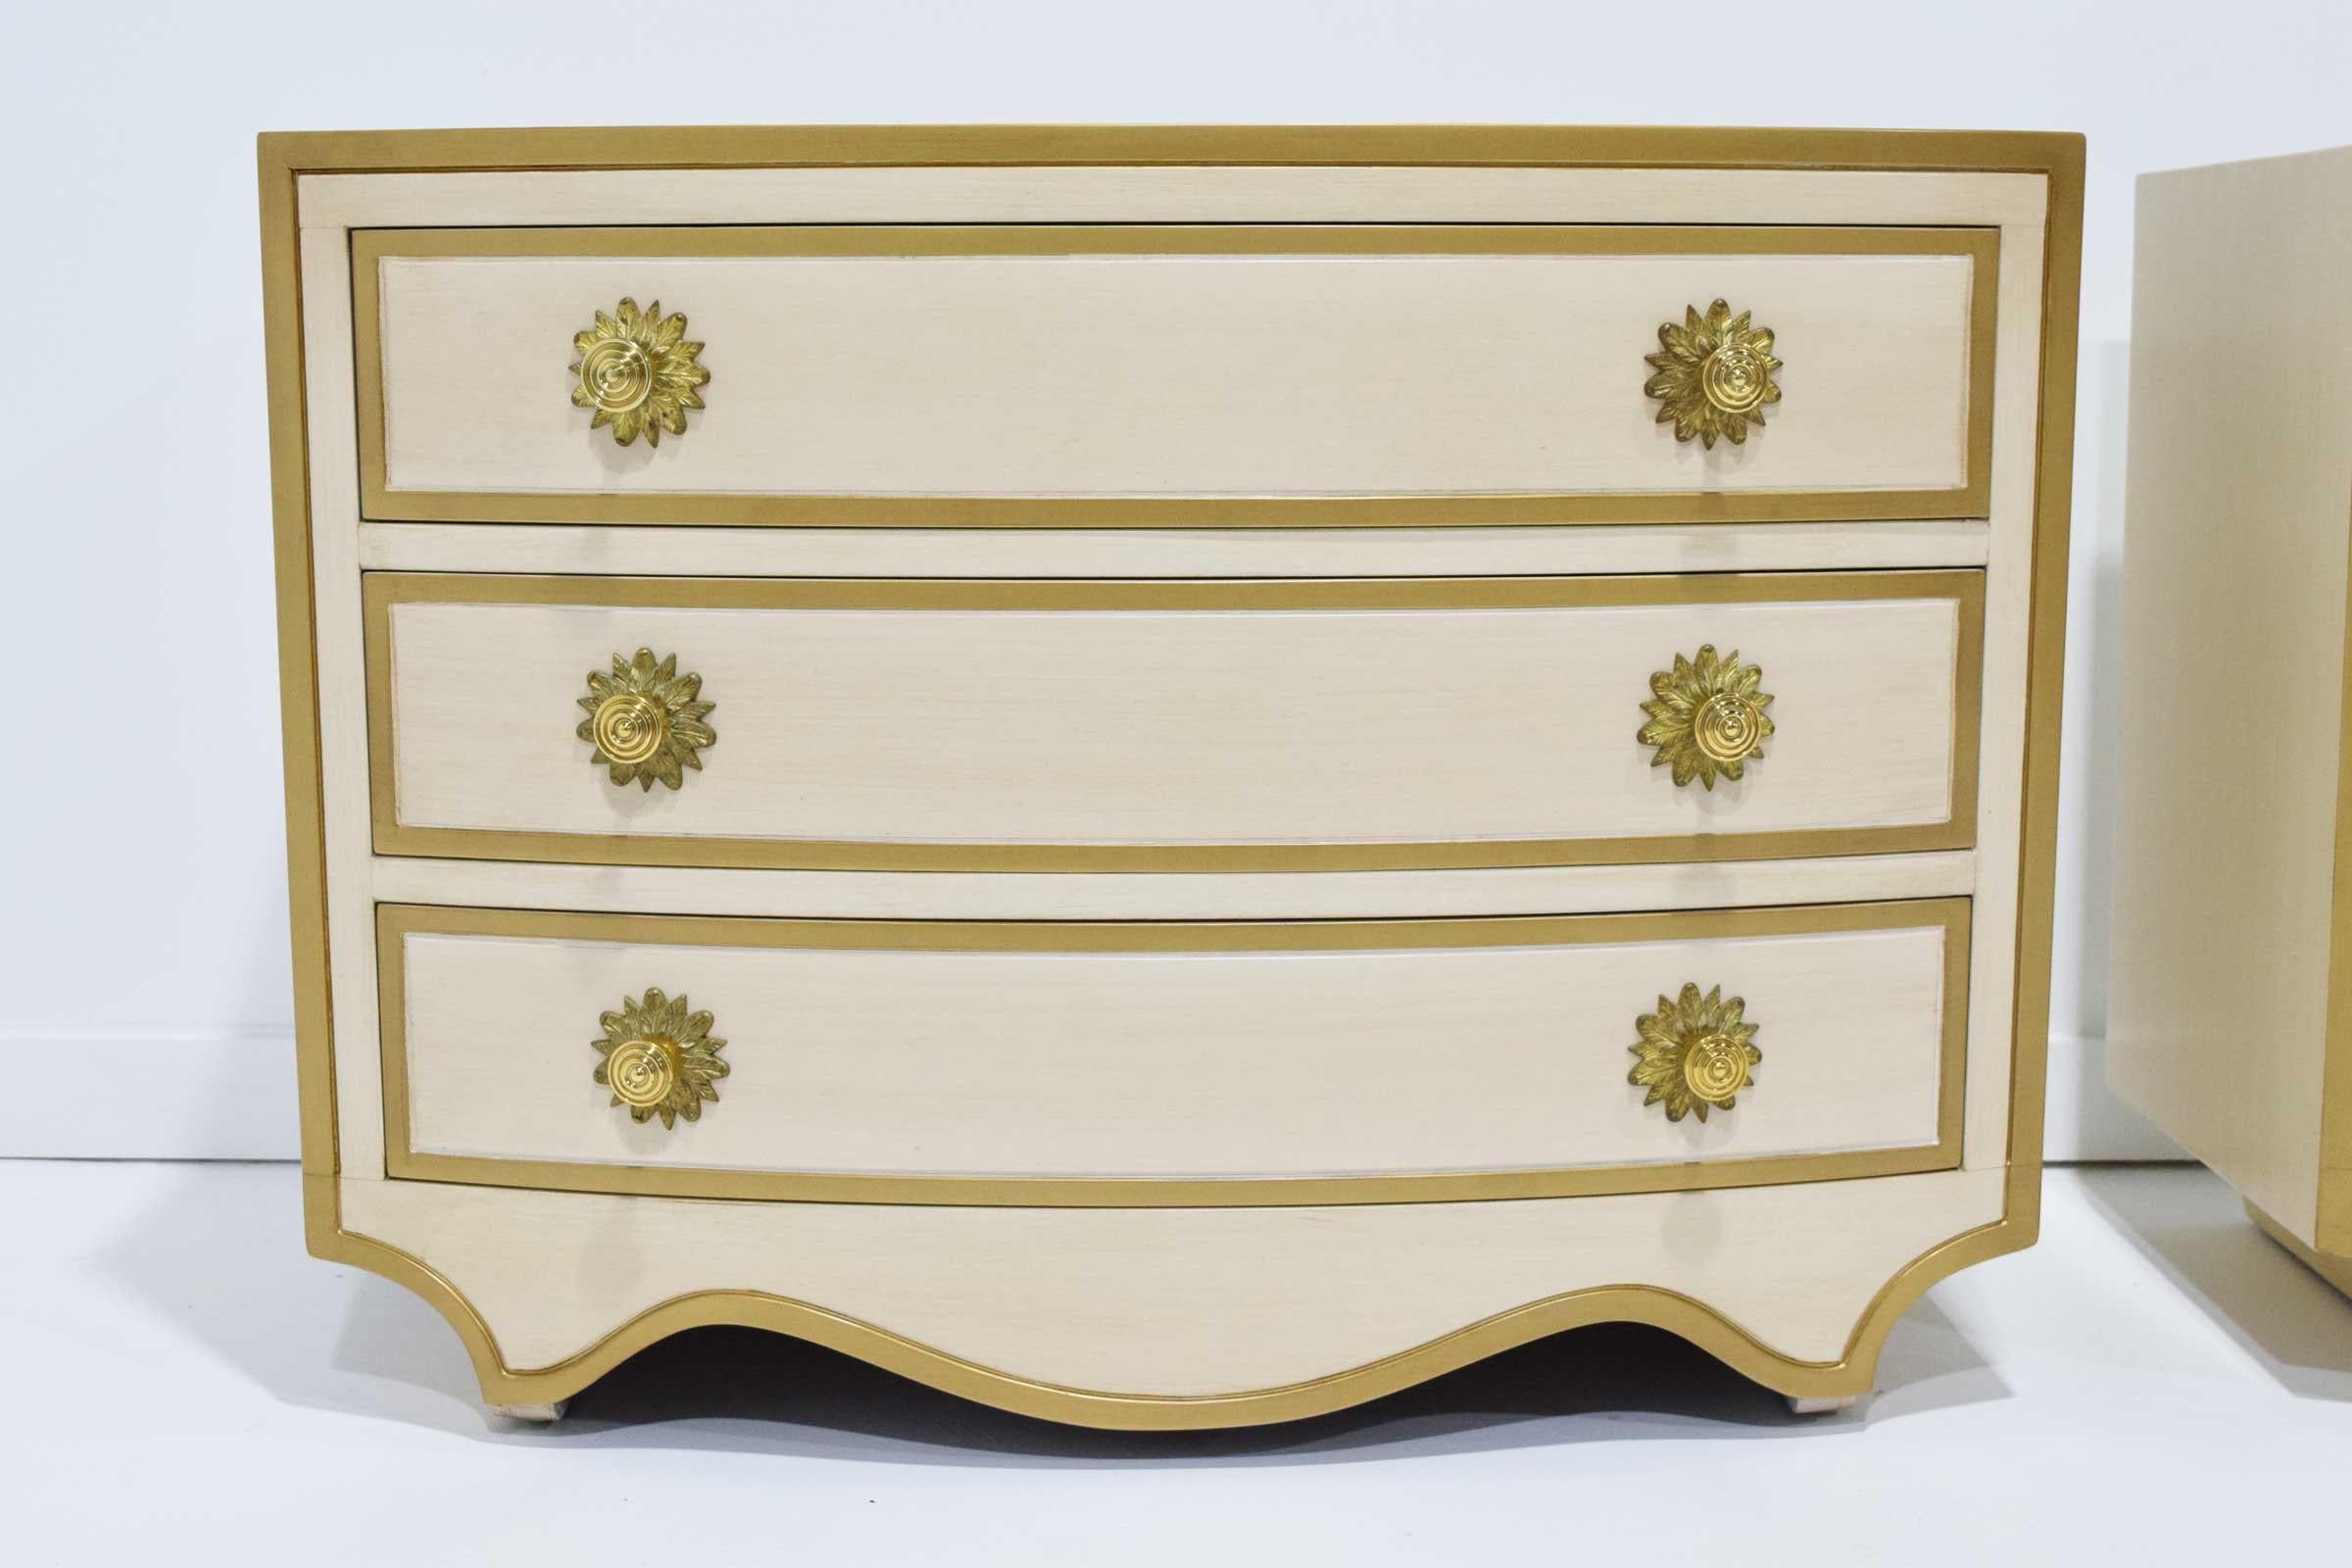 North American Dorothy Draper Viennese Collection Chests for Henredon